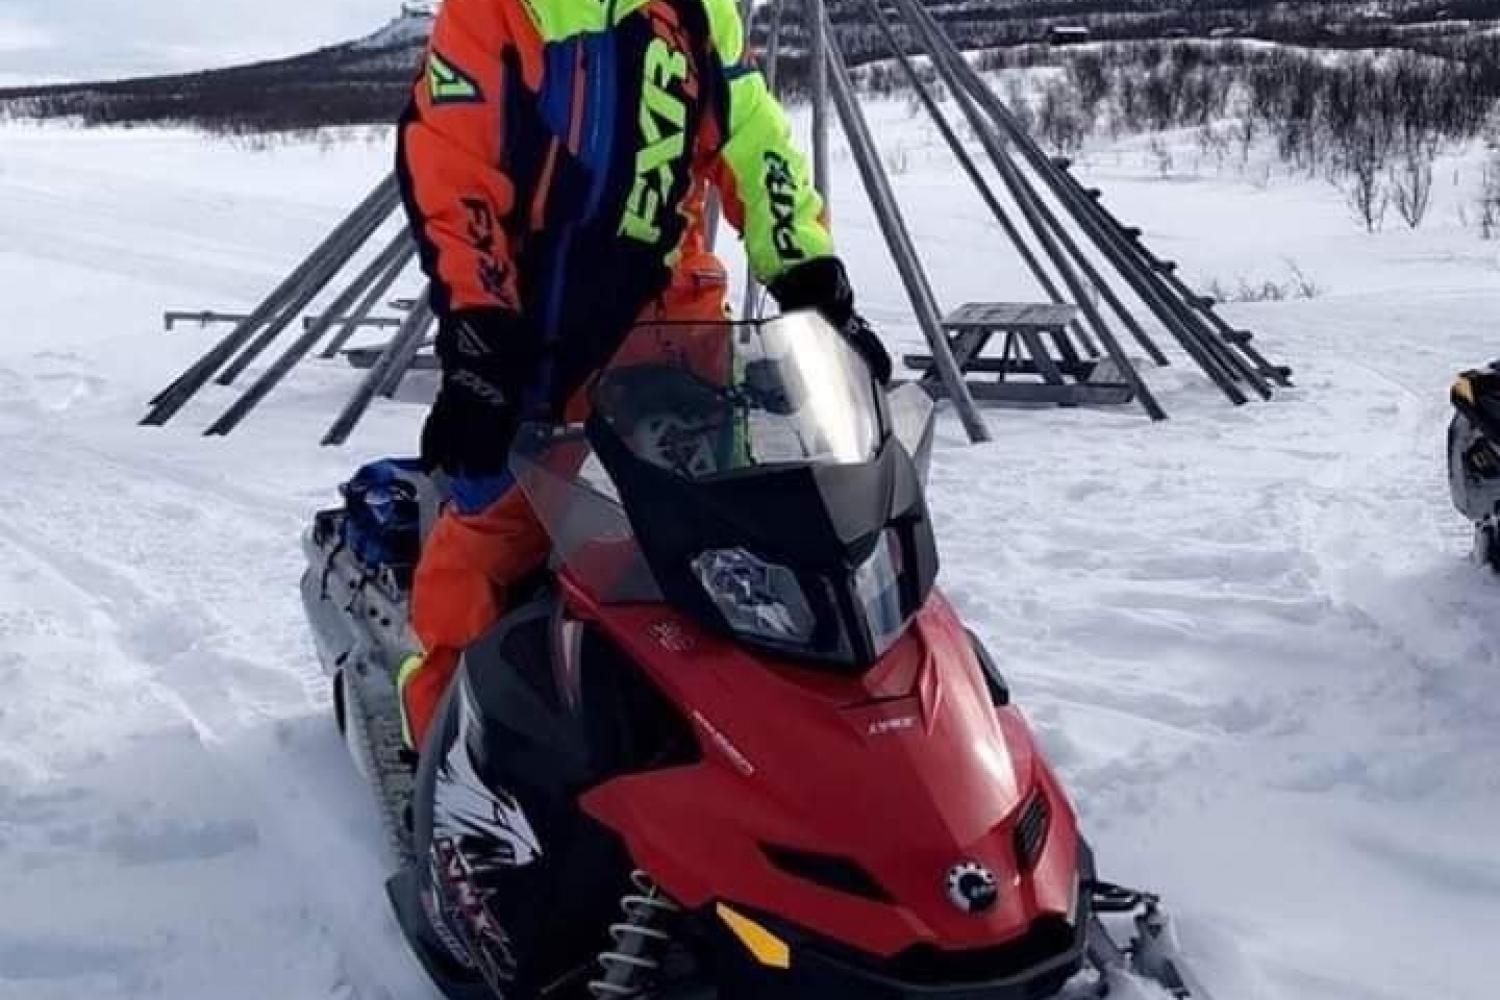 Fast-paced arctic fun with snow mobile!